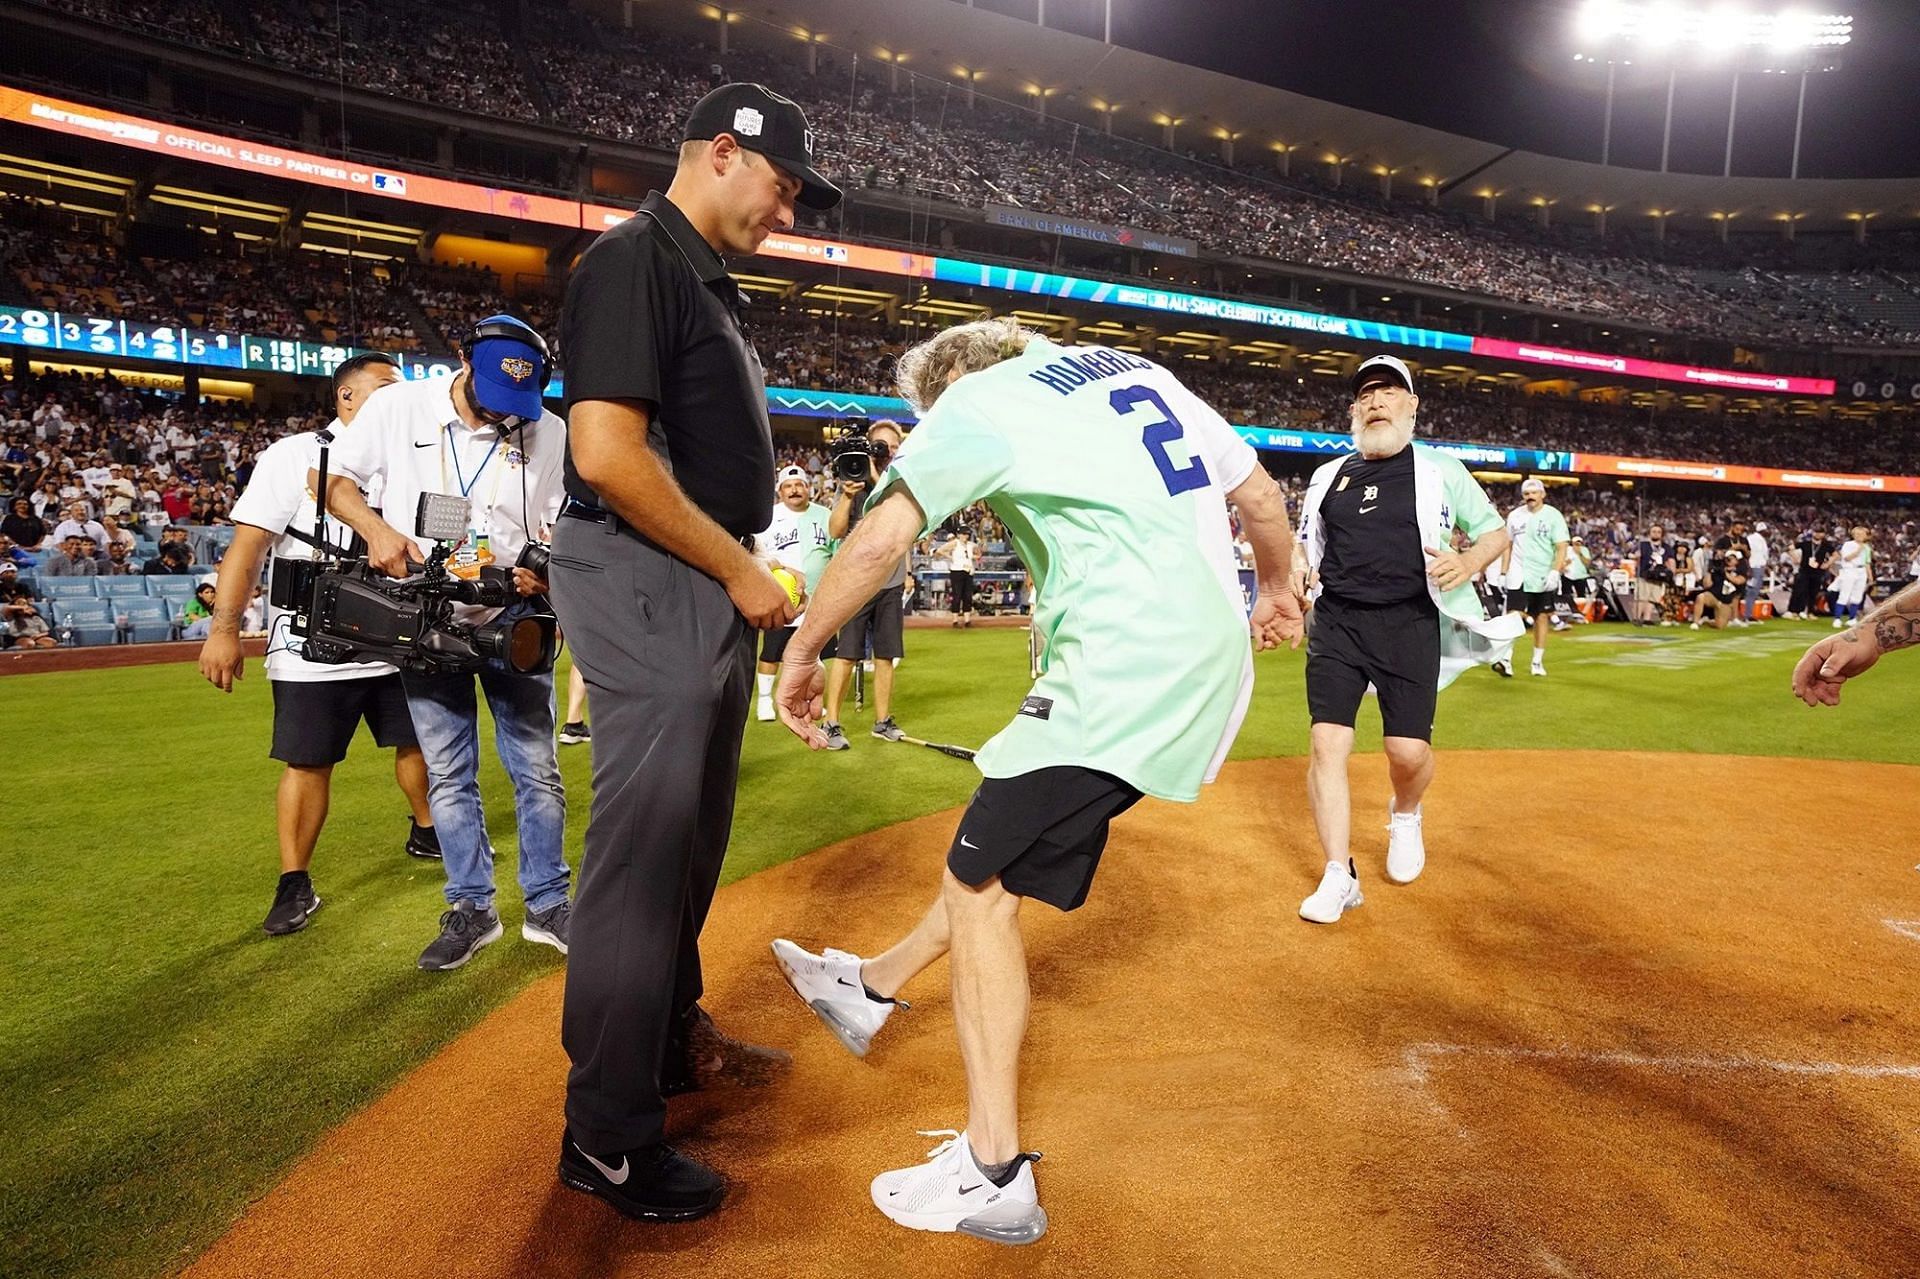 Bryan Cranston Hit By Ball, Ejected From All-Star Celebrity